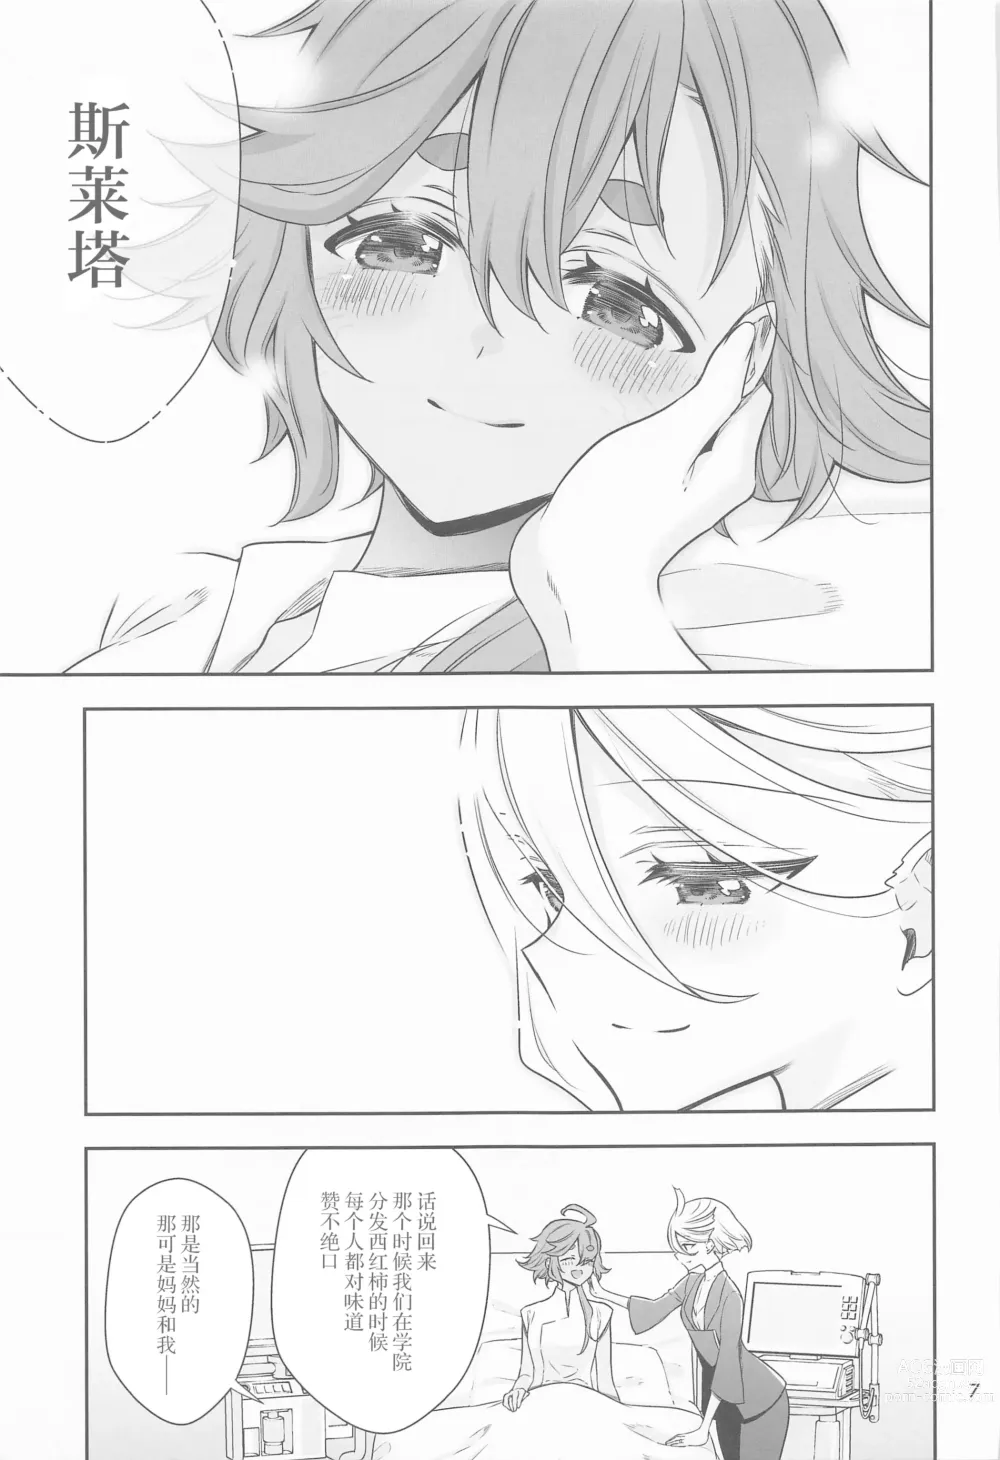 Page 7 of doujinshi 祝福之日